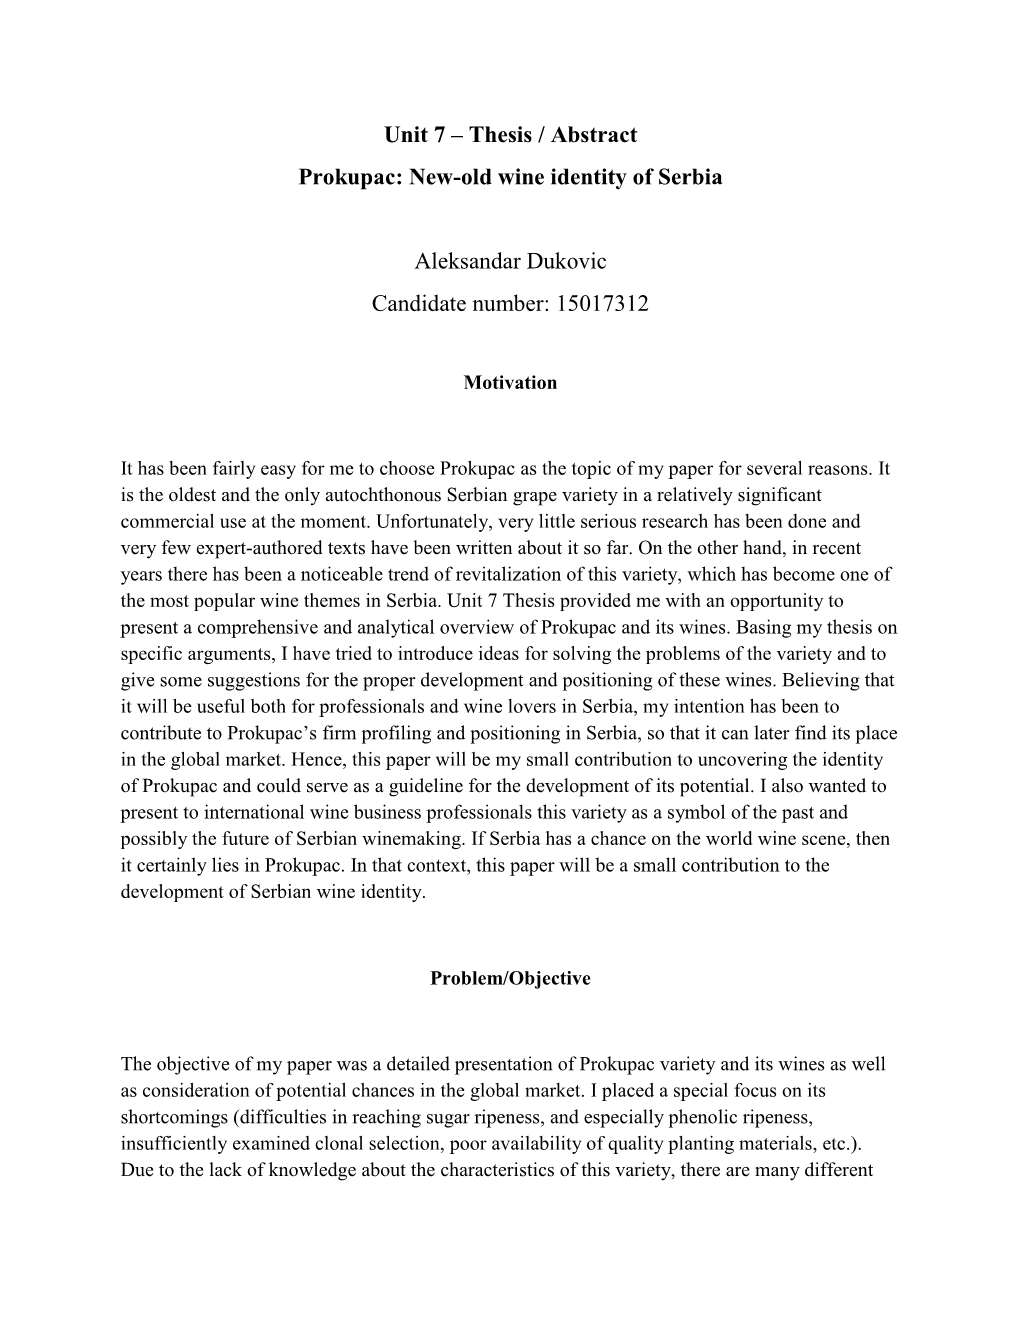 Unit 7 – Thesis / Abstract Prokupac: New-Old Wine Identity of Serbia Aleksandar Dukovic Candidate Number: 15017312